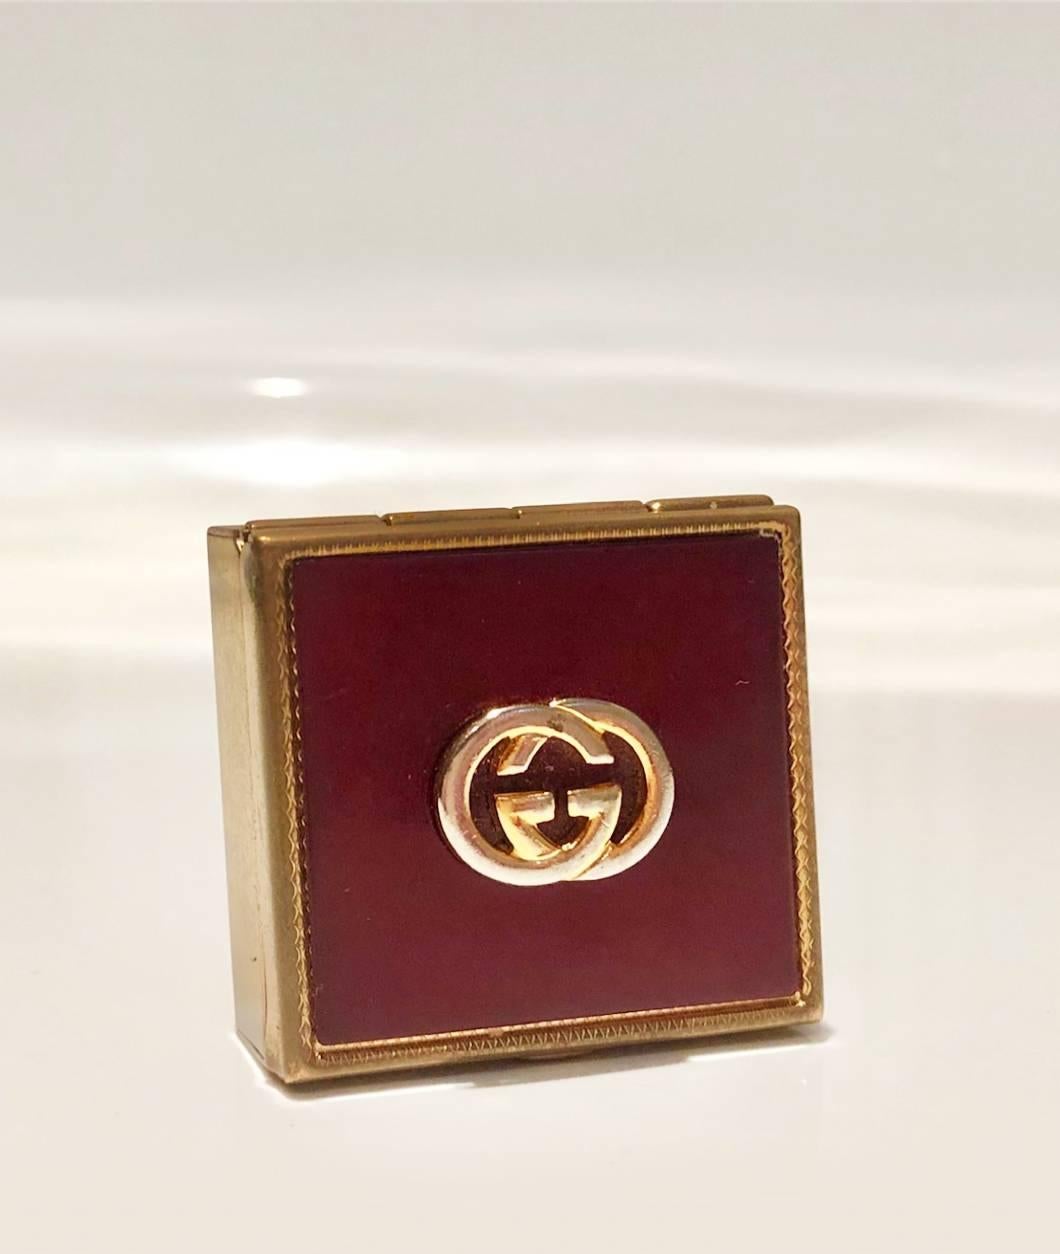 GUCCI GG metal interlocking logo square lidded Burgundy and Gold tone metal pocket pill box / ashtray / jewellery box, enamel top, stamped Gucci signature on inner lid, cigarette holder swivel attached. A truly rare piece.

Dimensions: 3.8x3.8cm